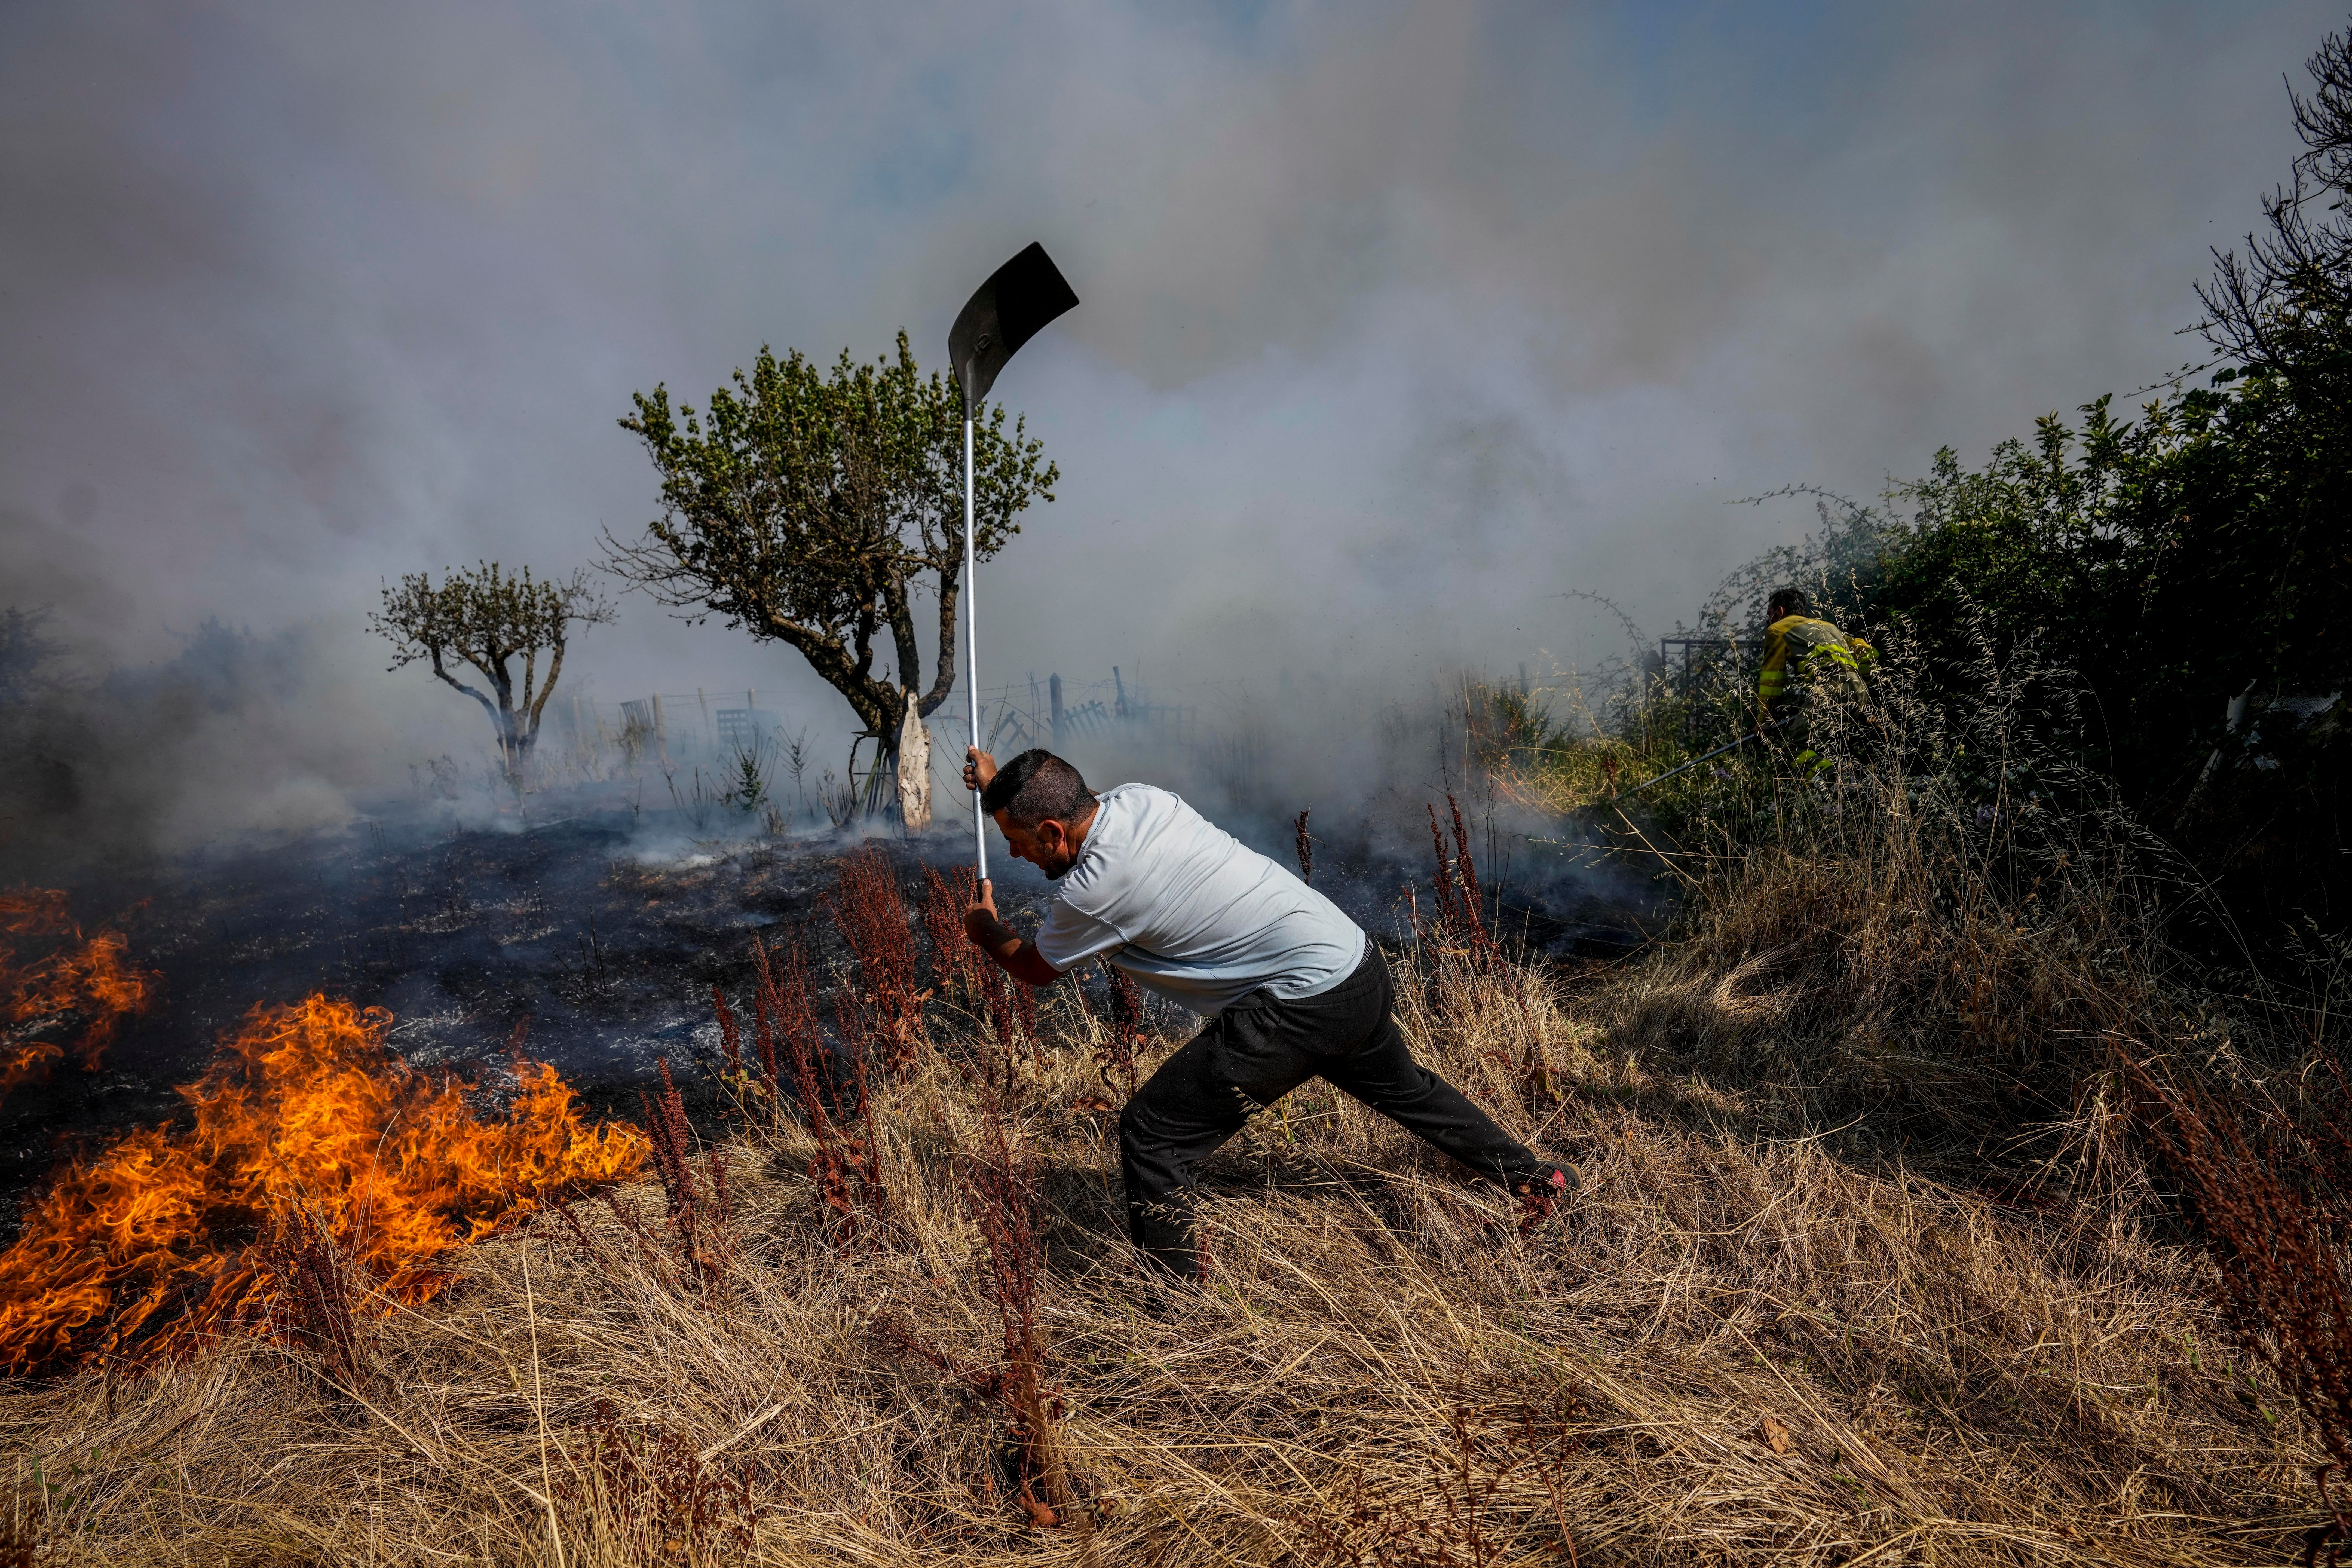 A local resident fights a forest fire with a shovel during a wildfire in Tabara, northwest Spain on Tuesday